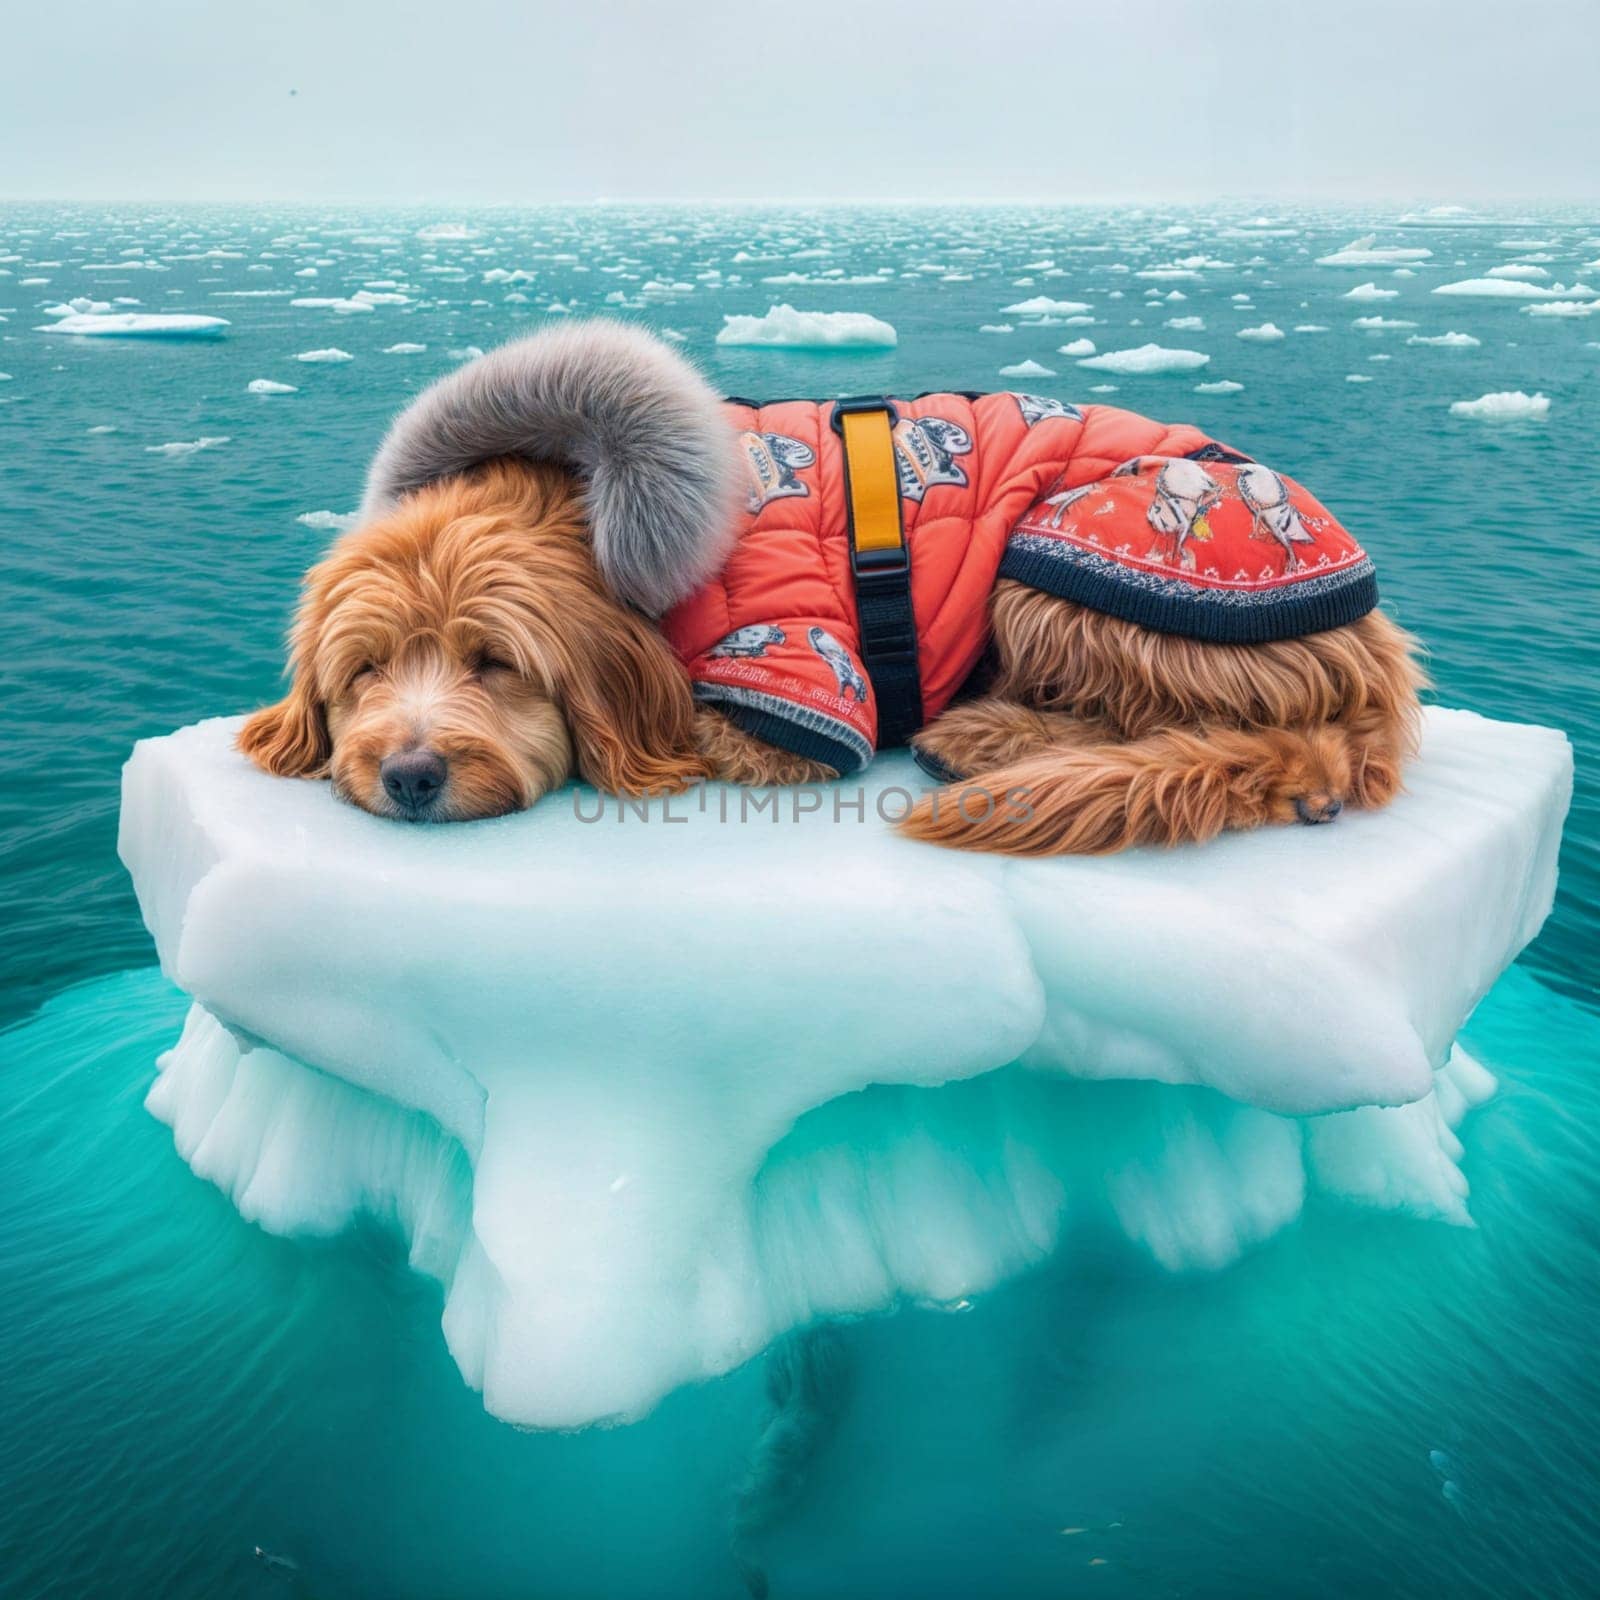 dog in yellow golden puffer lie on block of ice alone in middle of the ocean climate change poster by verbano